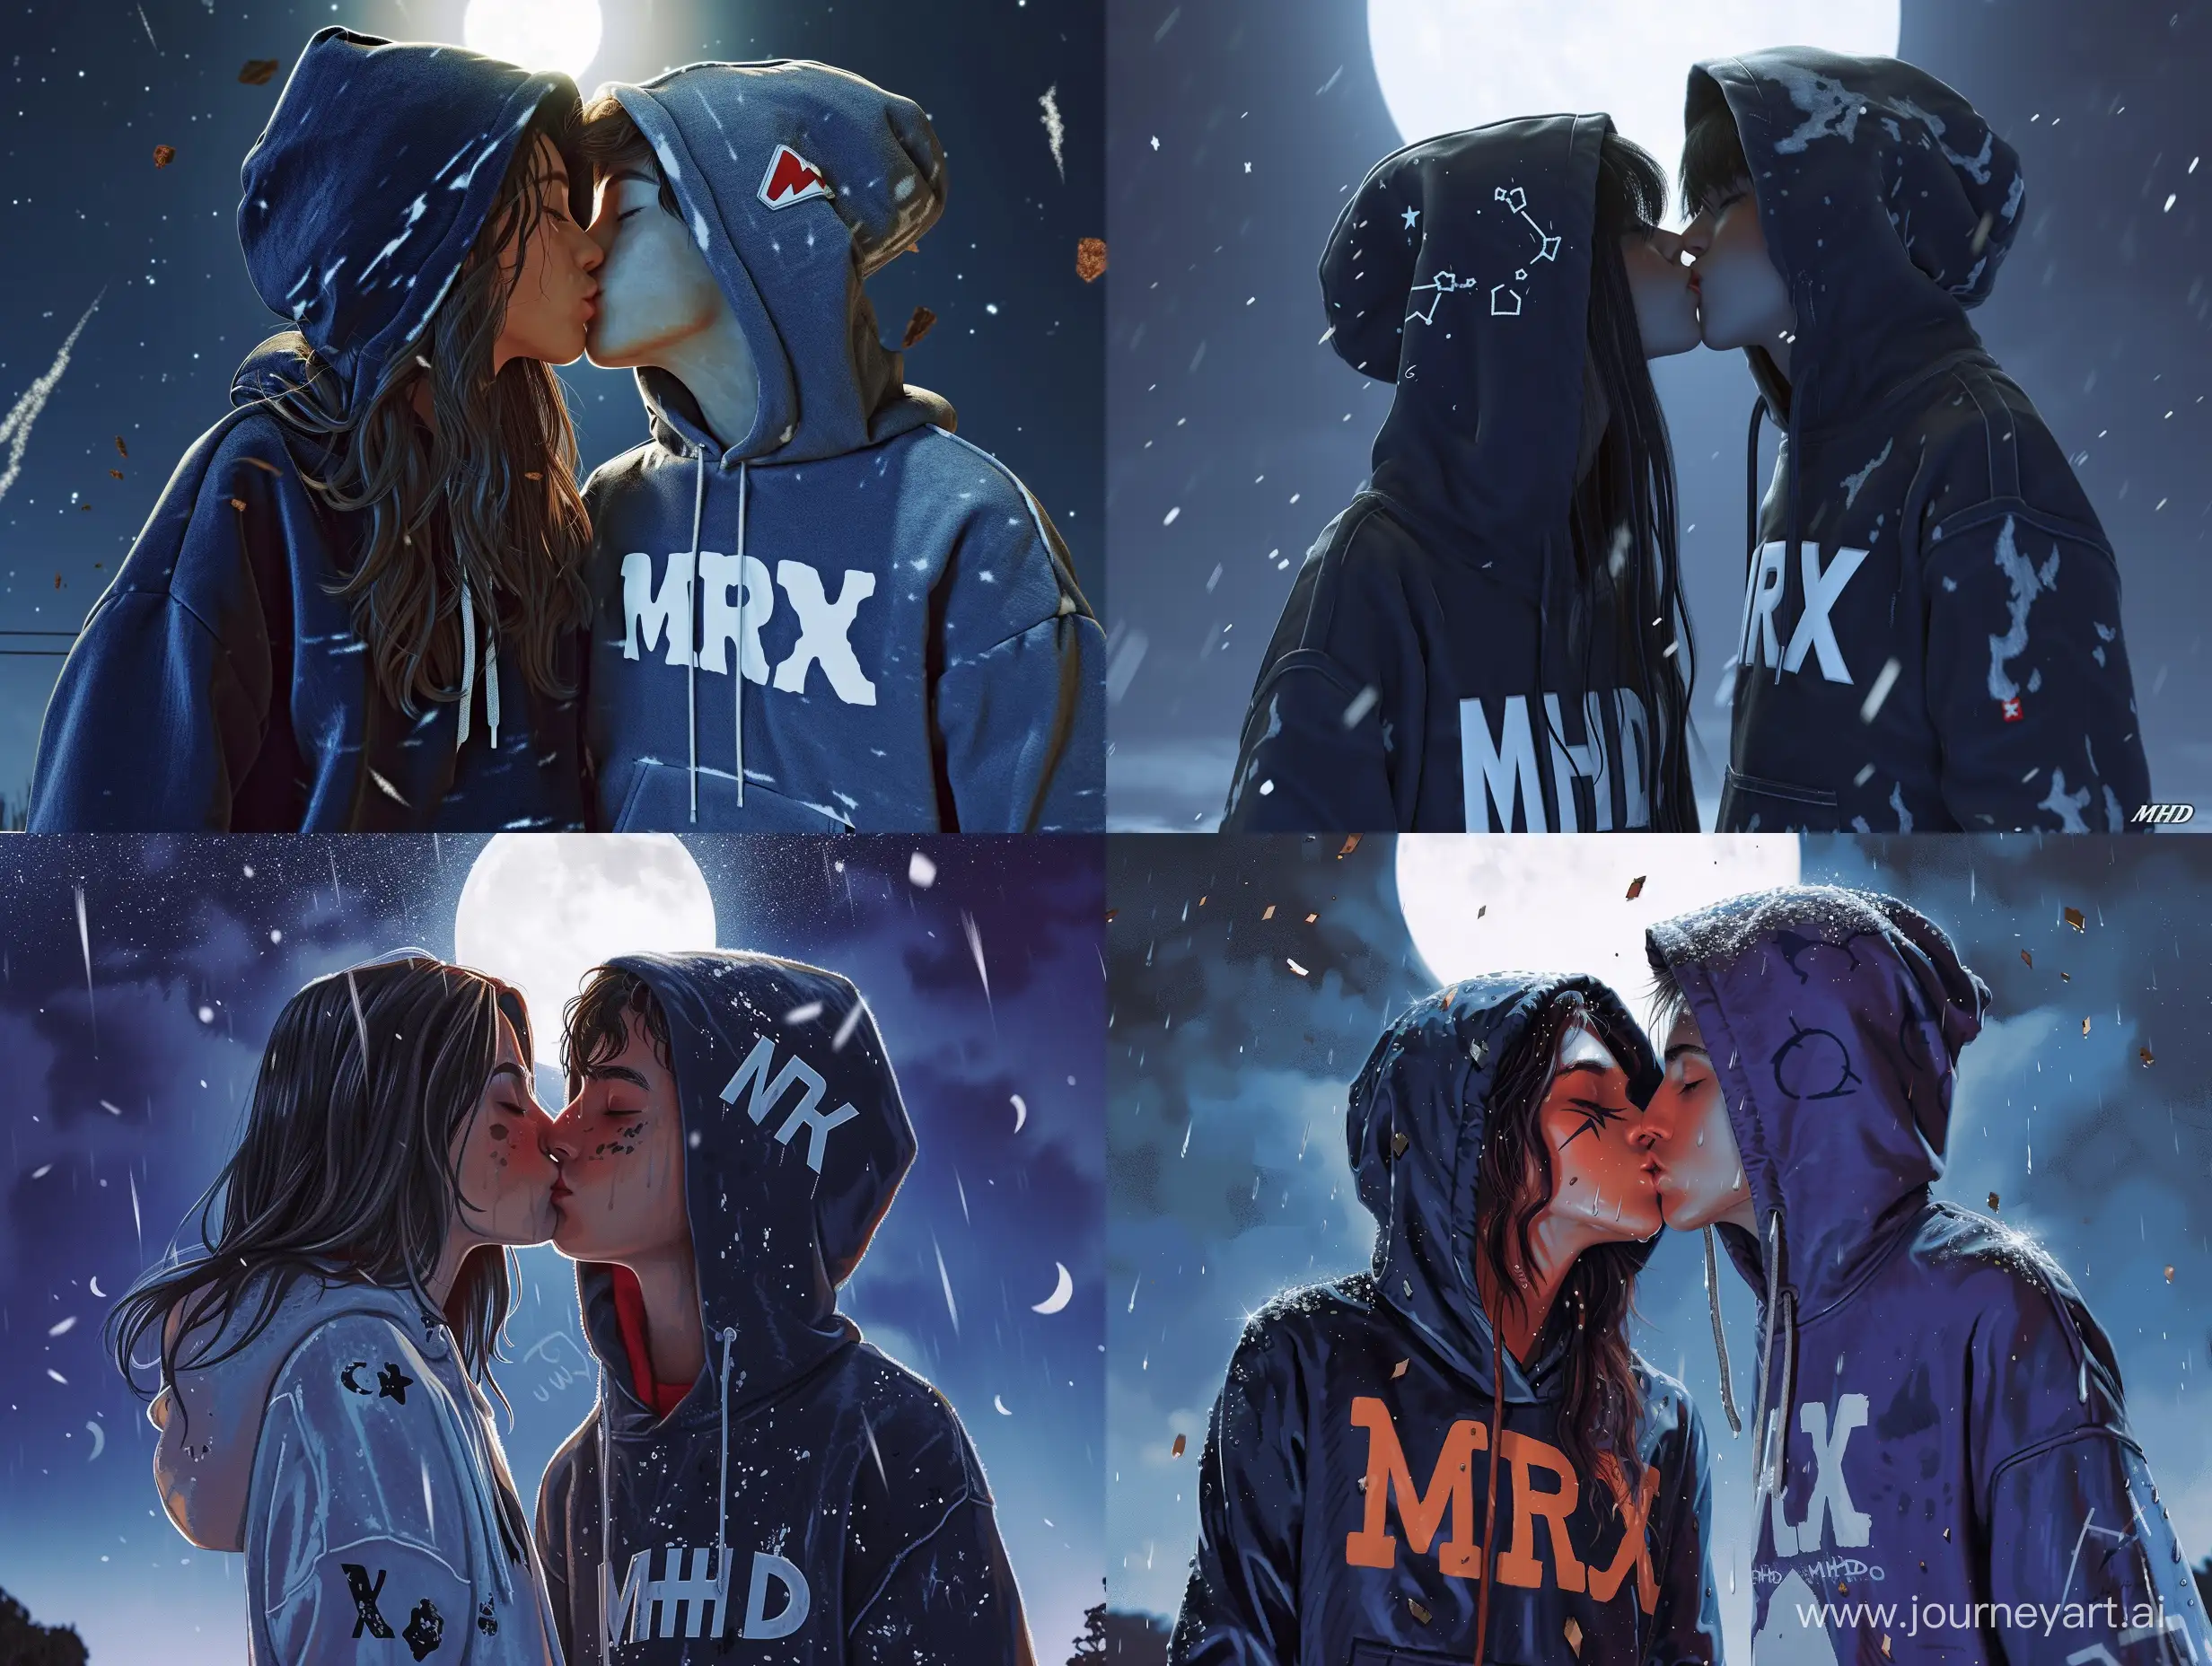 Romantic-Night-MRX-and-MHD-Hoody-Couples-Kiss-Under-the-Moon